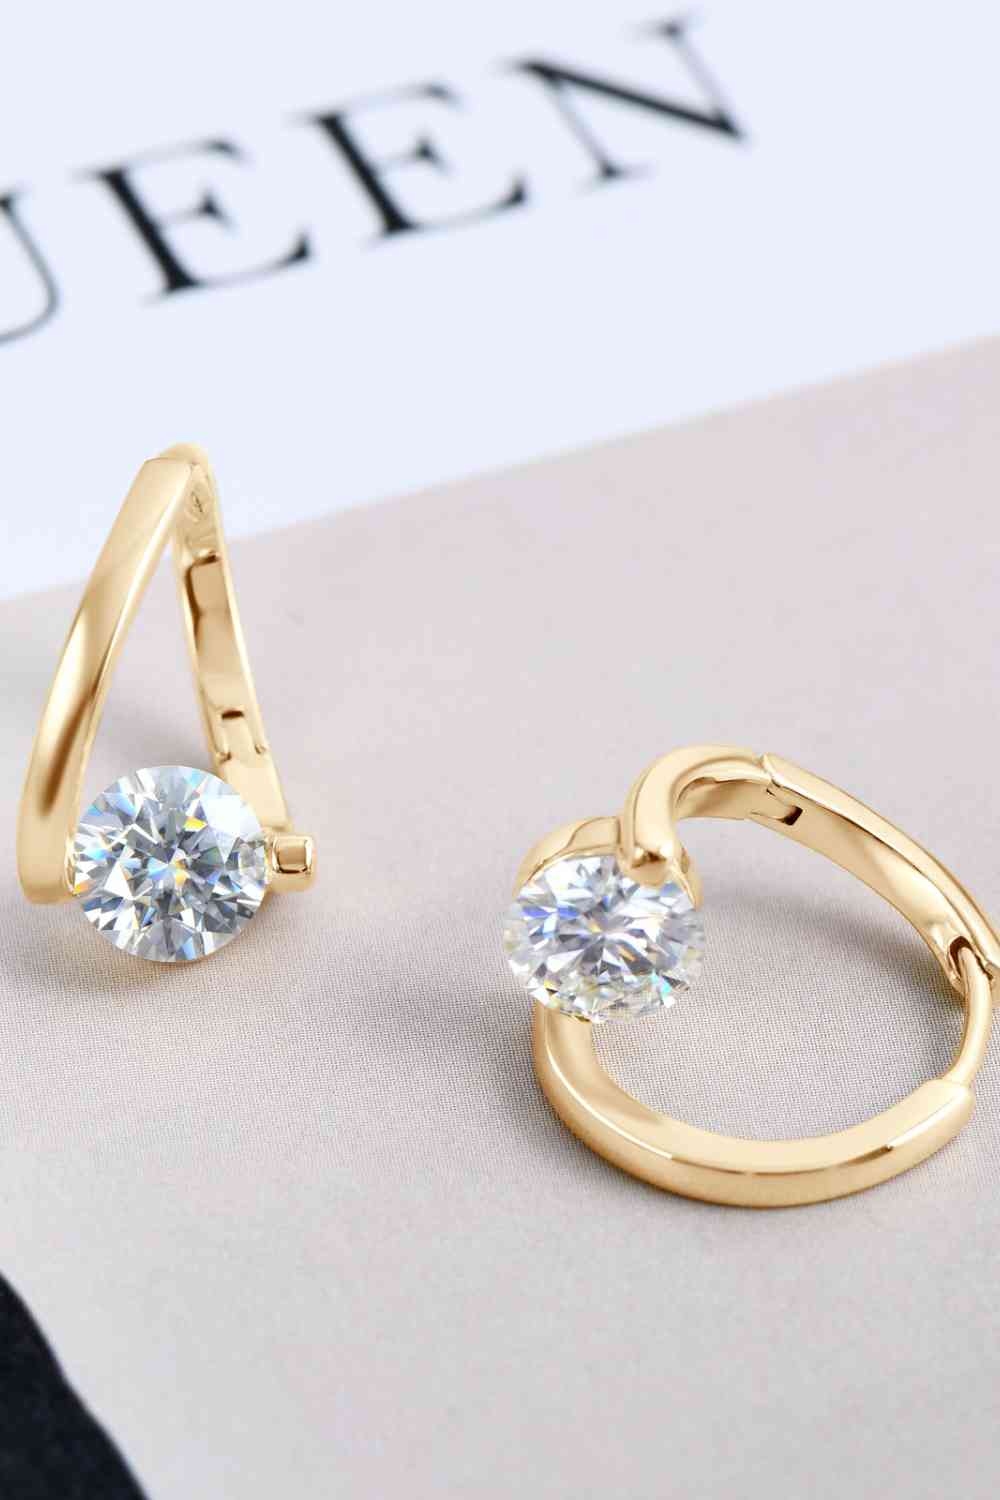 a pair of gold earrings with a diamond in the middle